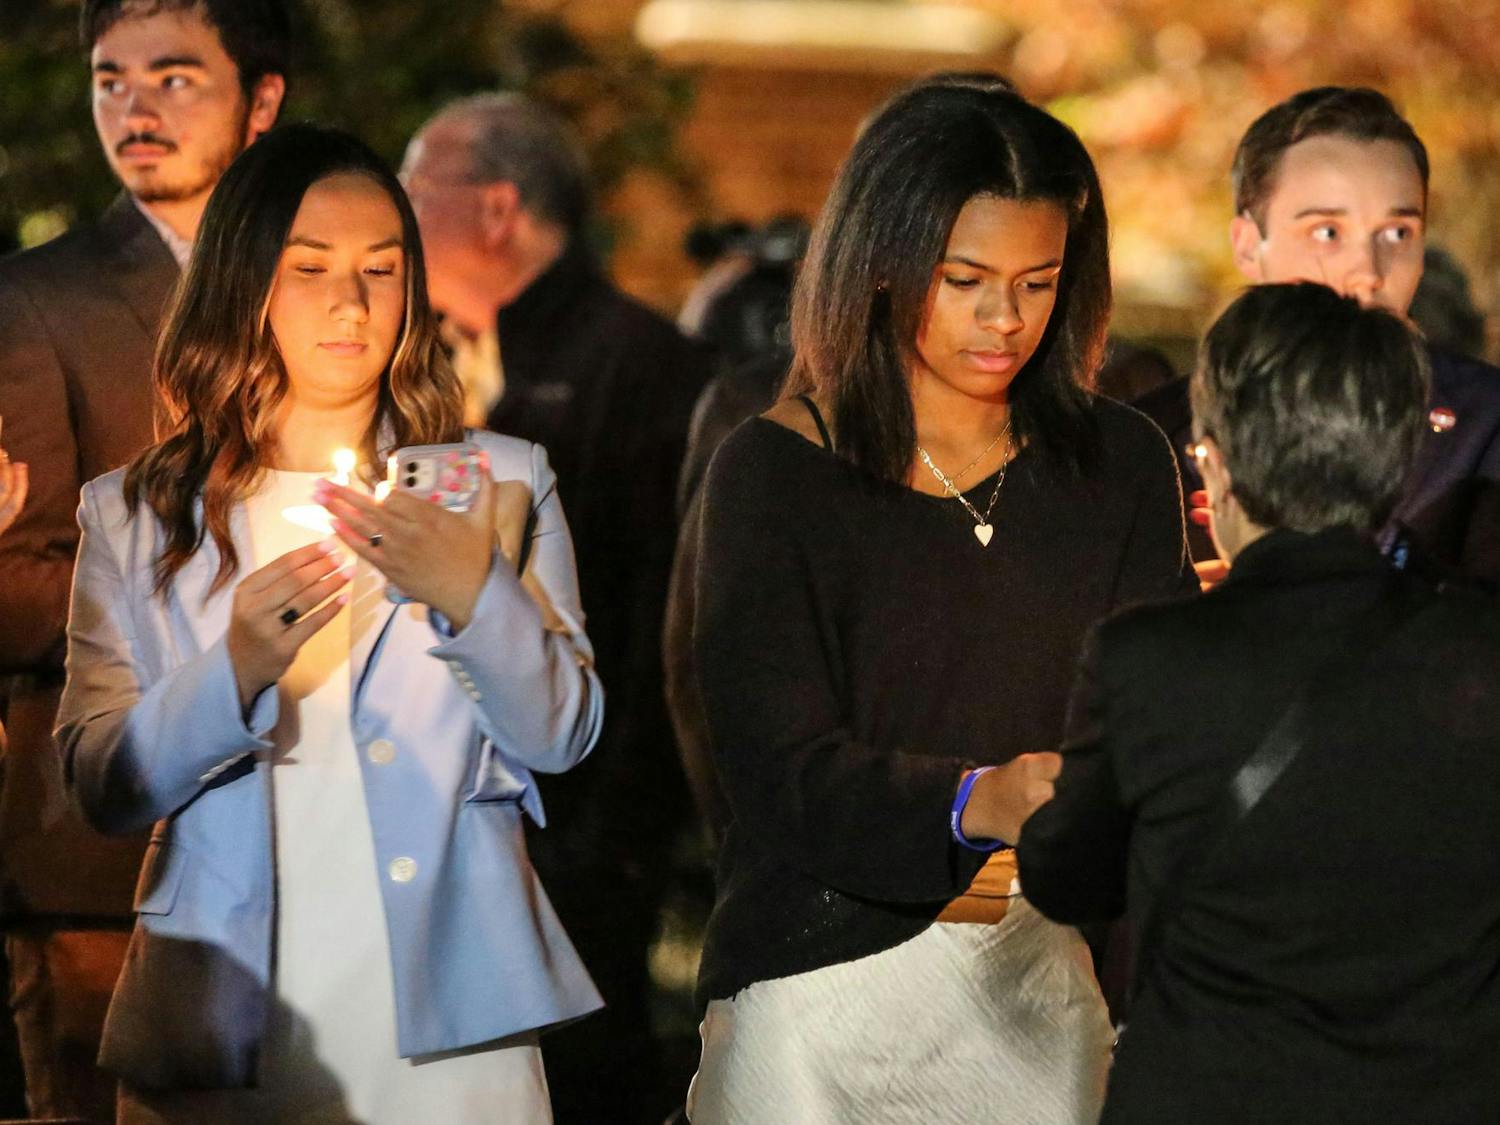 Fourth-year public relations student and Student Body President Emmie Thompson and third-year marketing and finance student and Student Body Vice President Abrianna Reaves light their candles prior to a Jewish community vigil in the garden of the Anne Frank Center at the University of South Carolina on Oct. 17, 2023. The vigil was hosted by Gamecocks for Israel, Hillel at UofSC, Alpha Epsilon Pi, Chabad on Campus and the University of South Carolina.